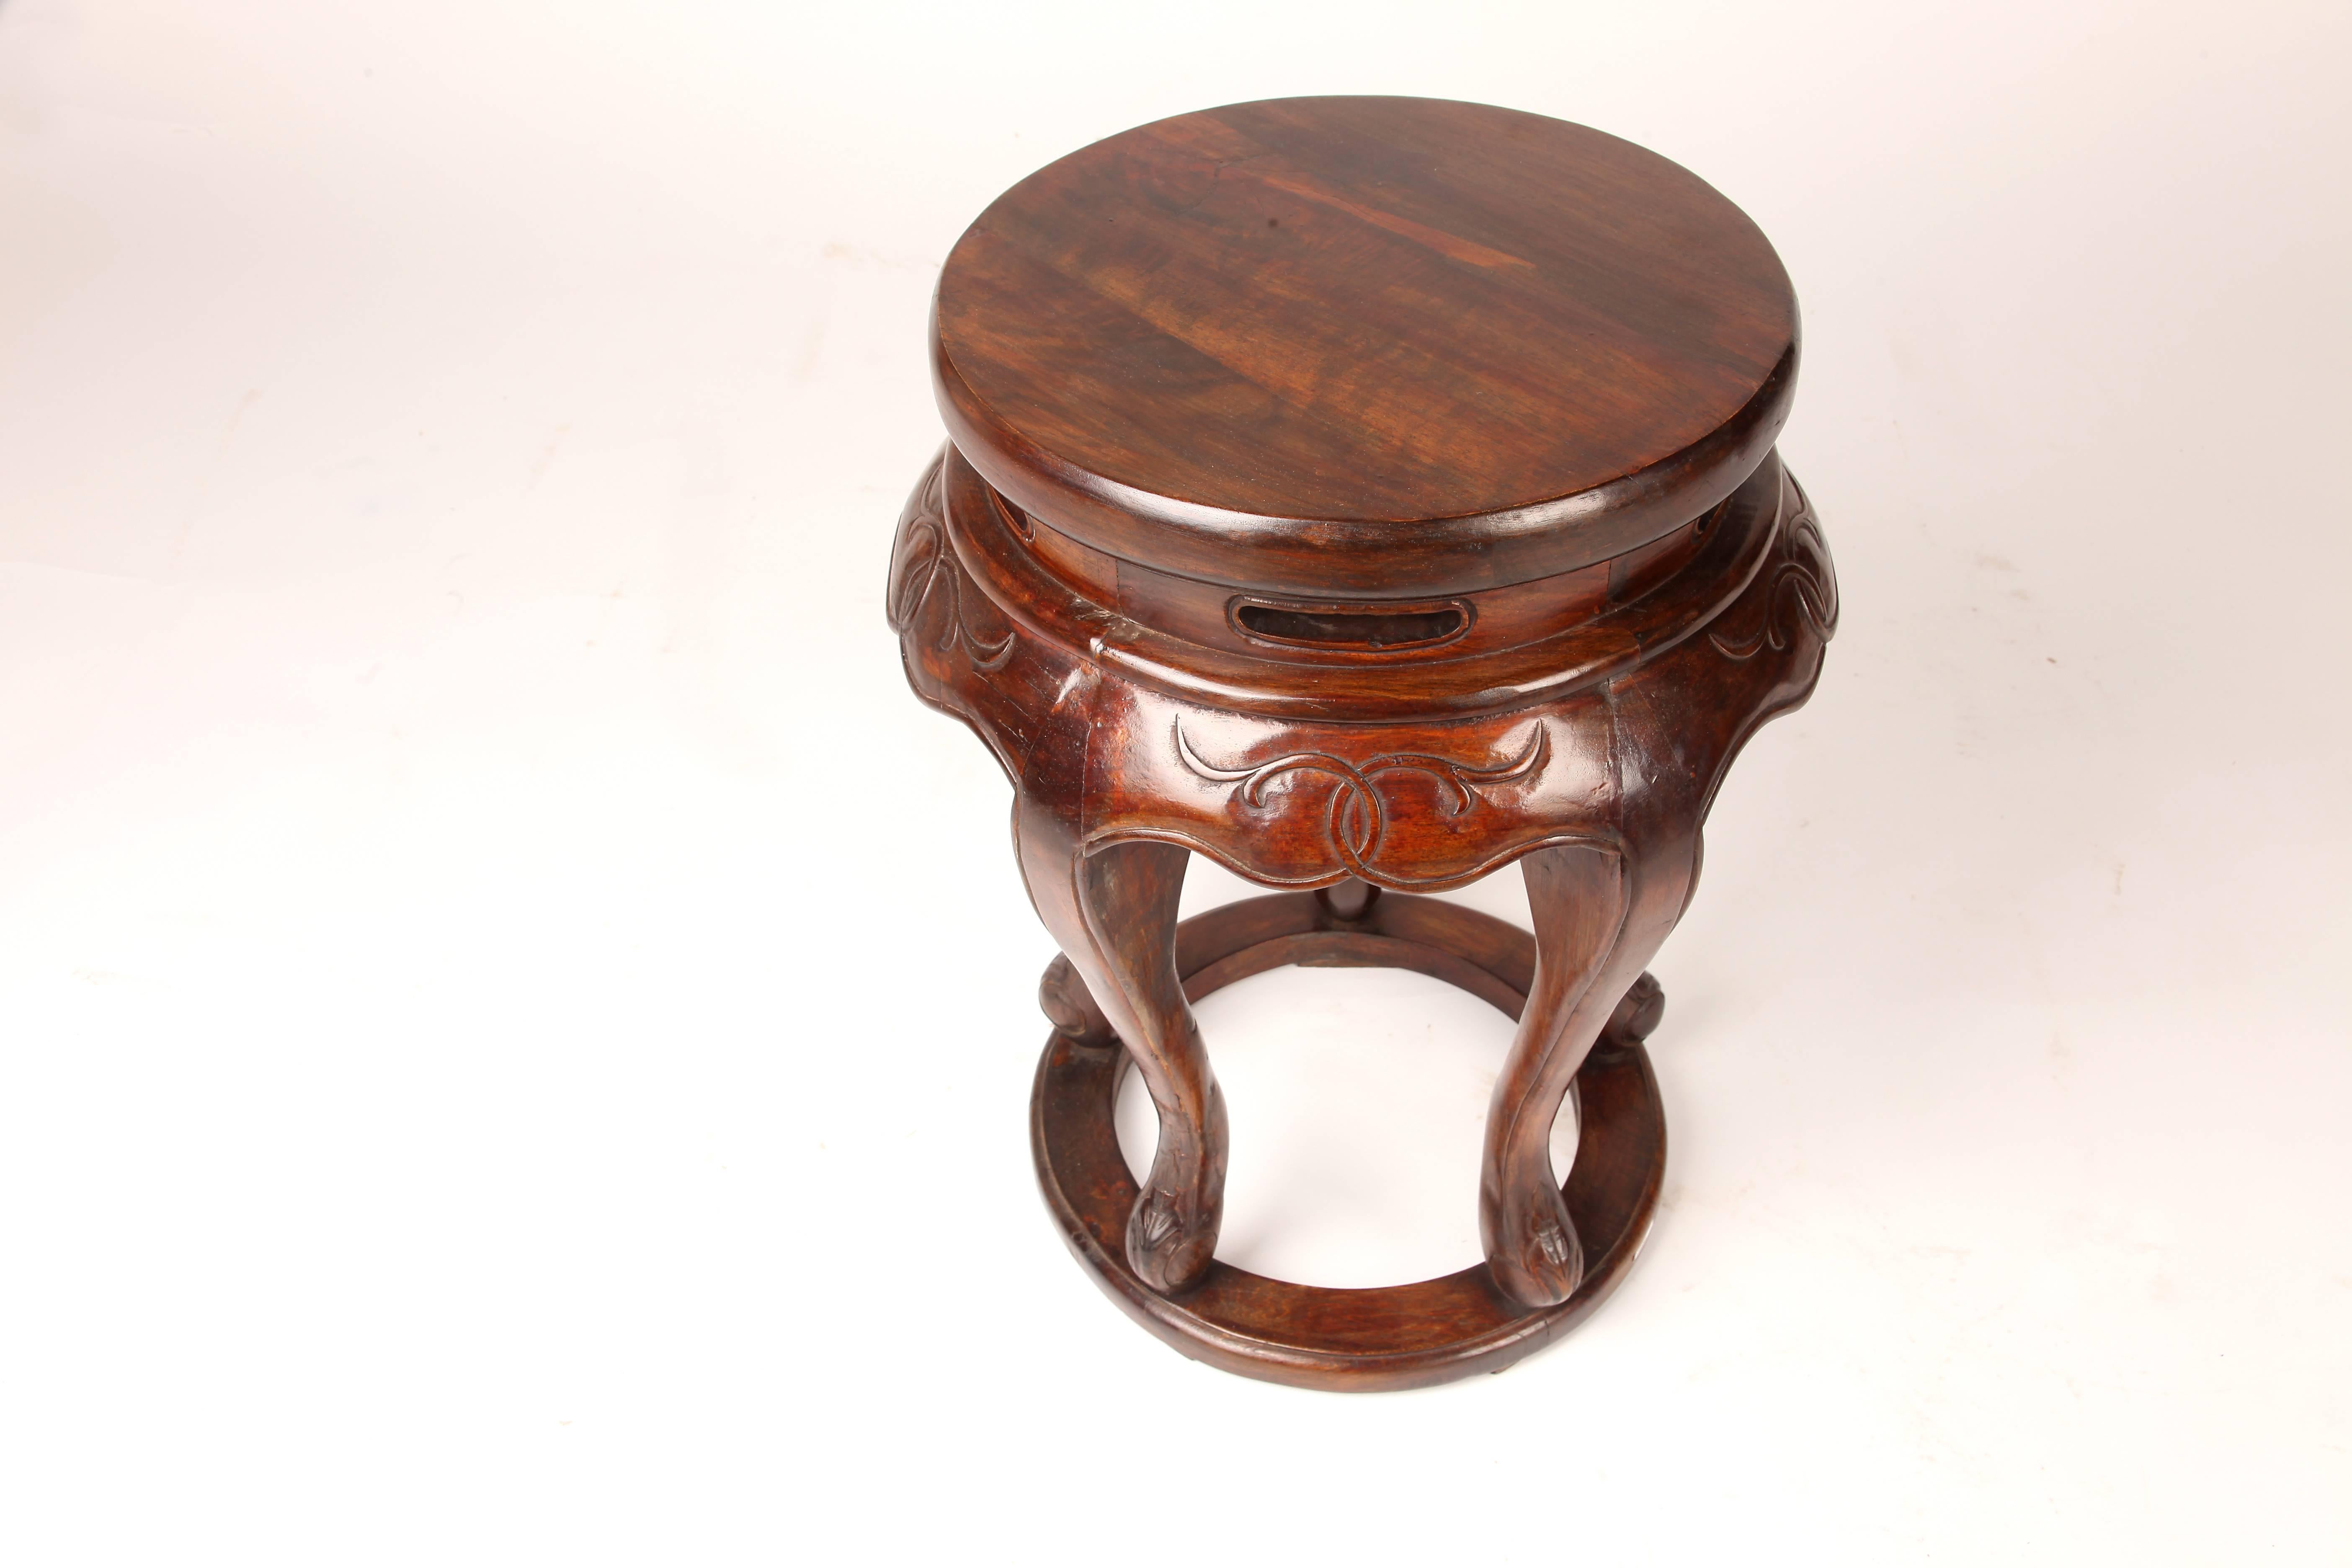 This Chinese high-waisted incense stand is made from walnut and features cabriole legs and a continuous floor stretcher. It can also function as a stool or side table.